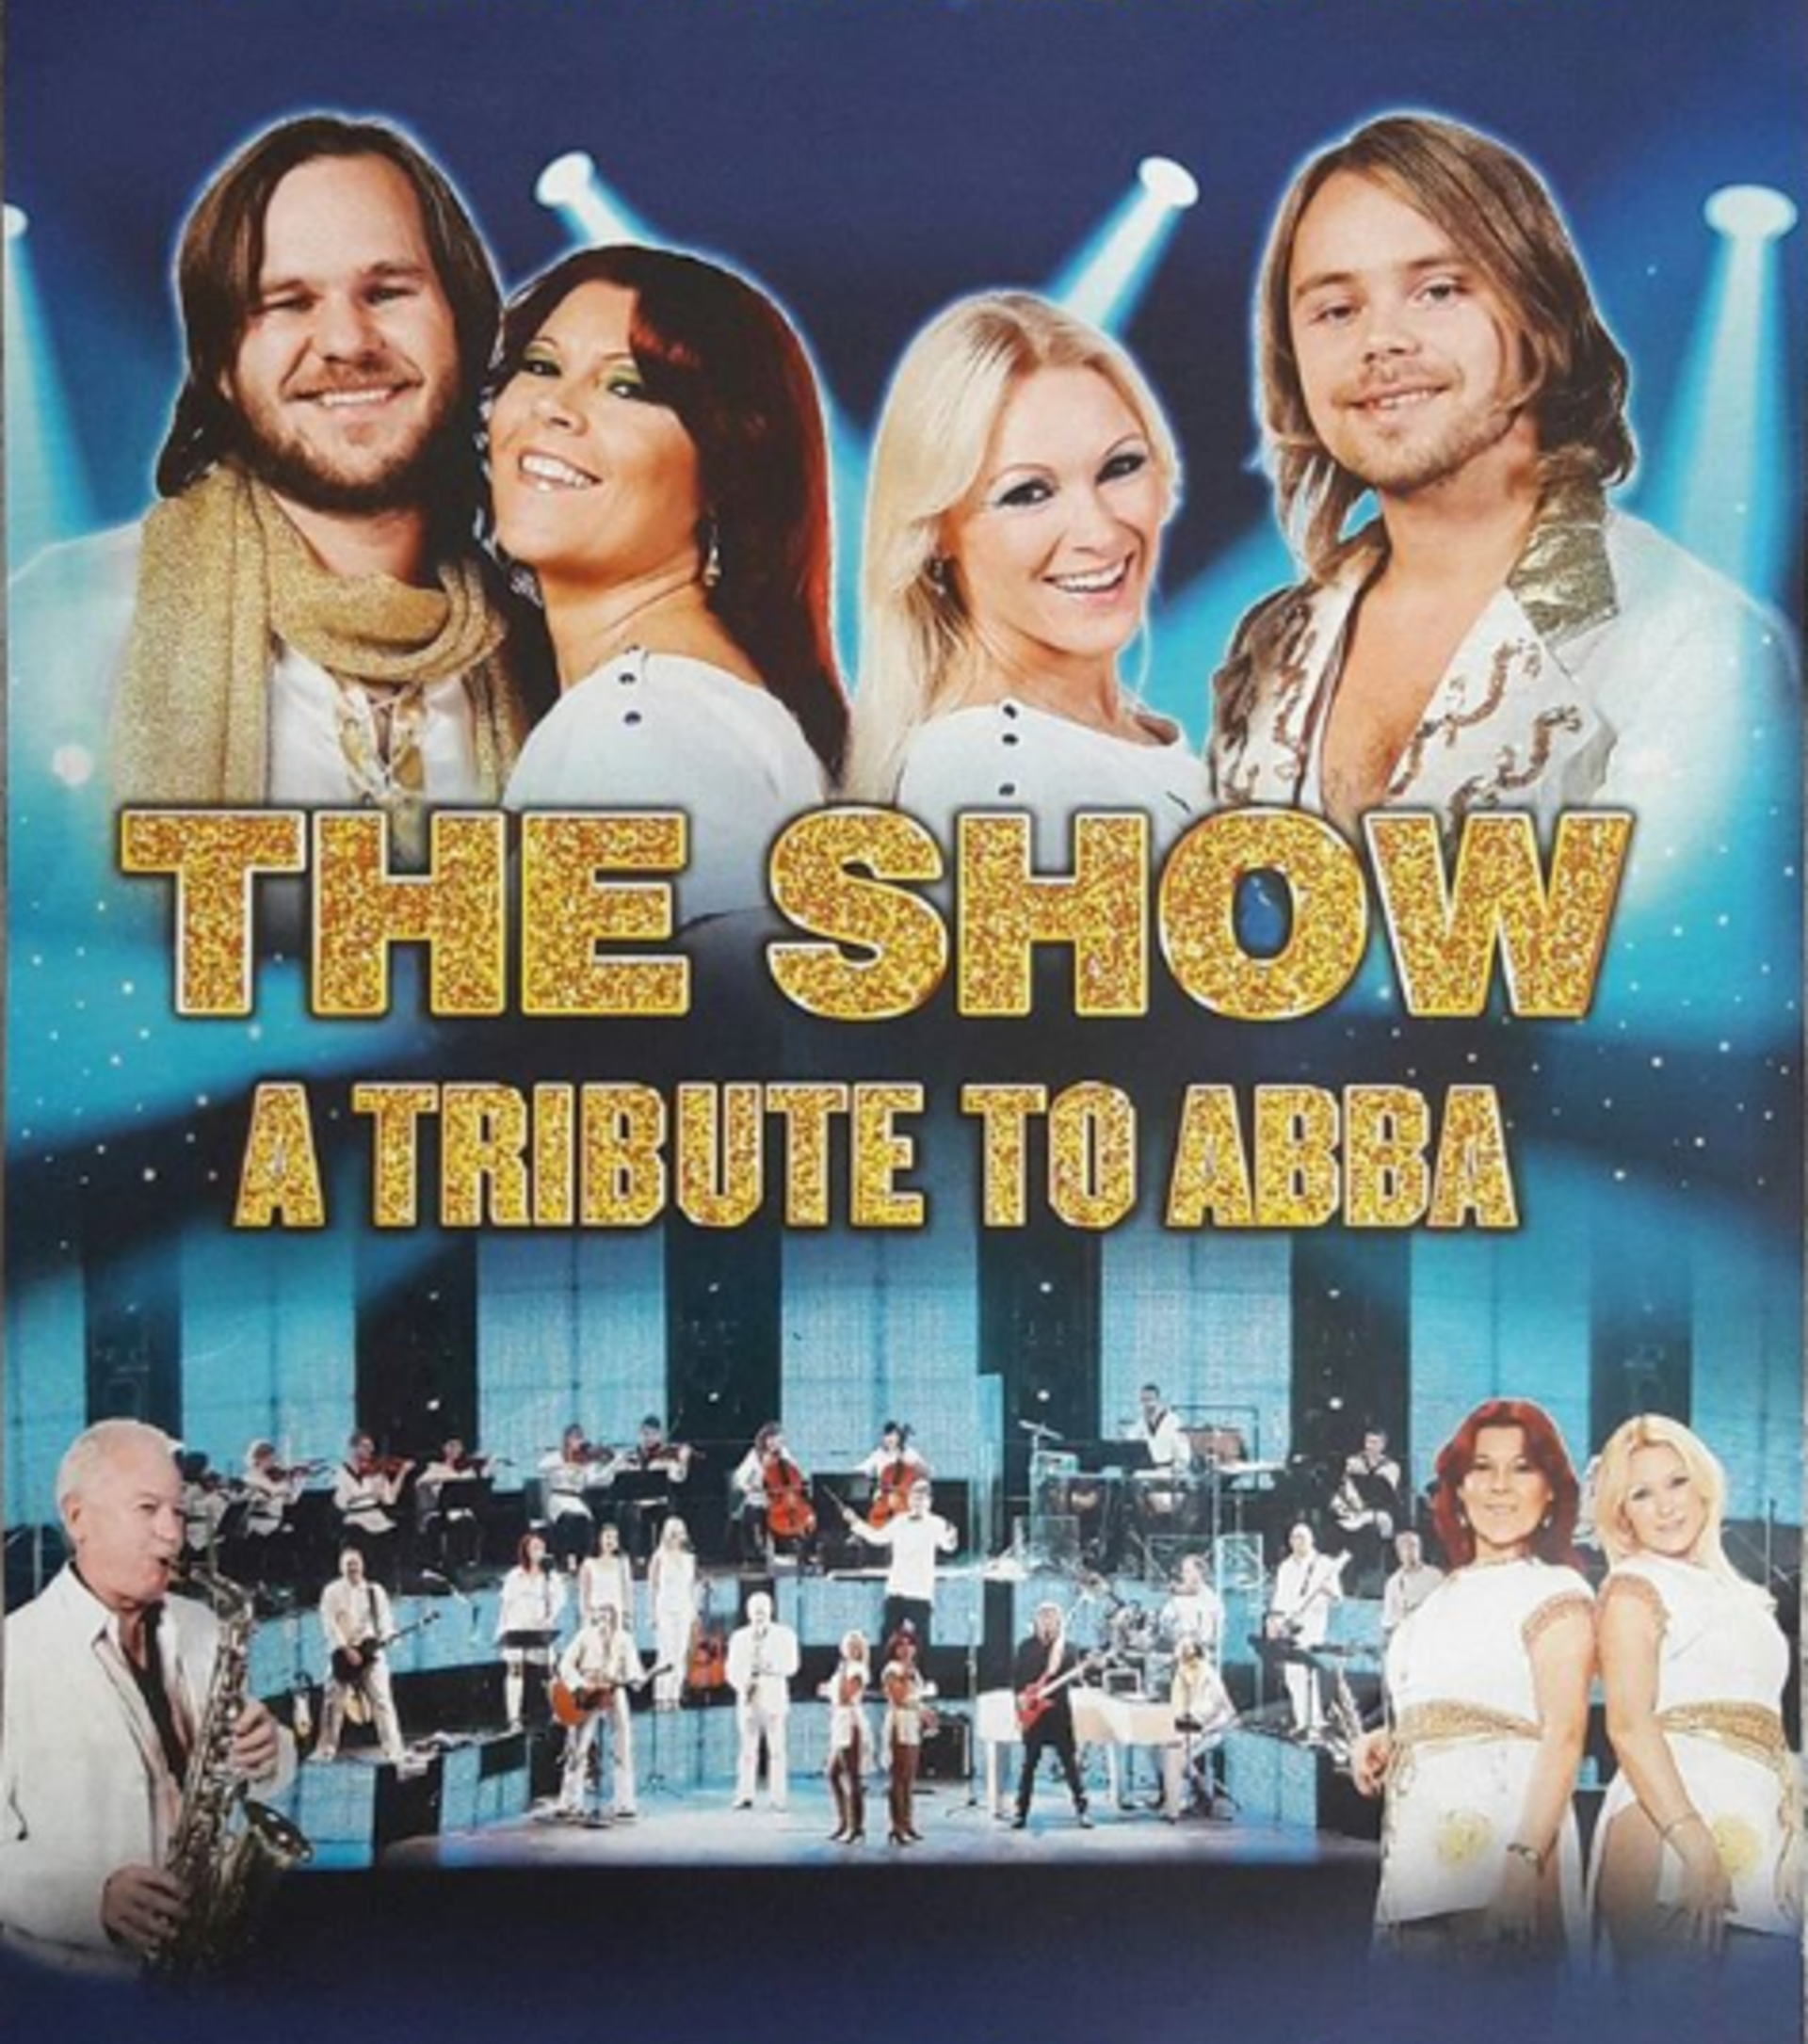 The Show - A Tribute to Abba